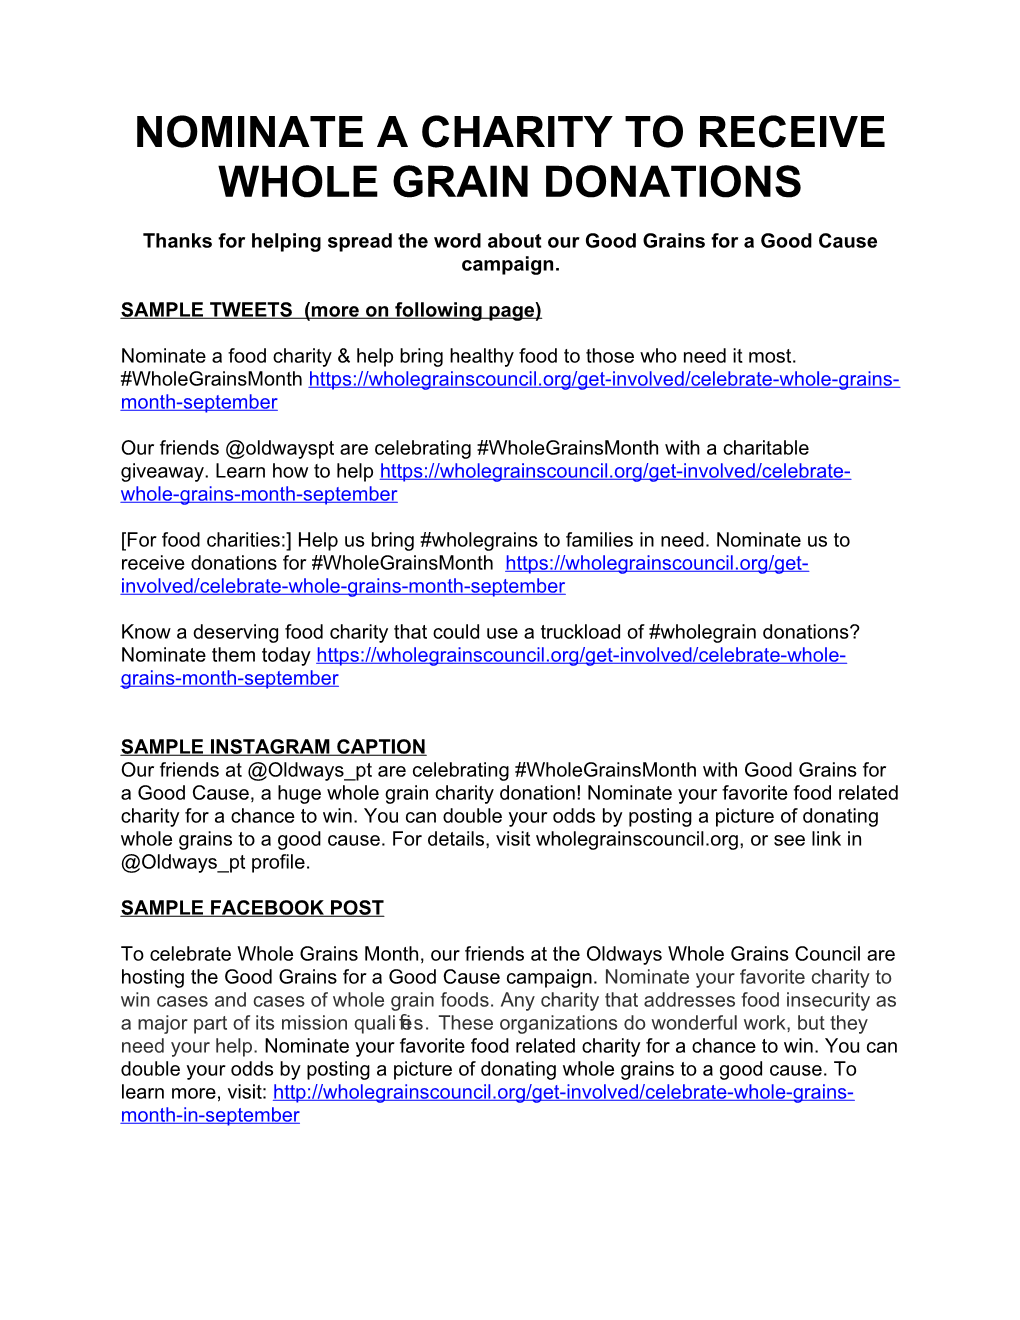 Nominate a Charity to Receive Whole Grain Donations